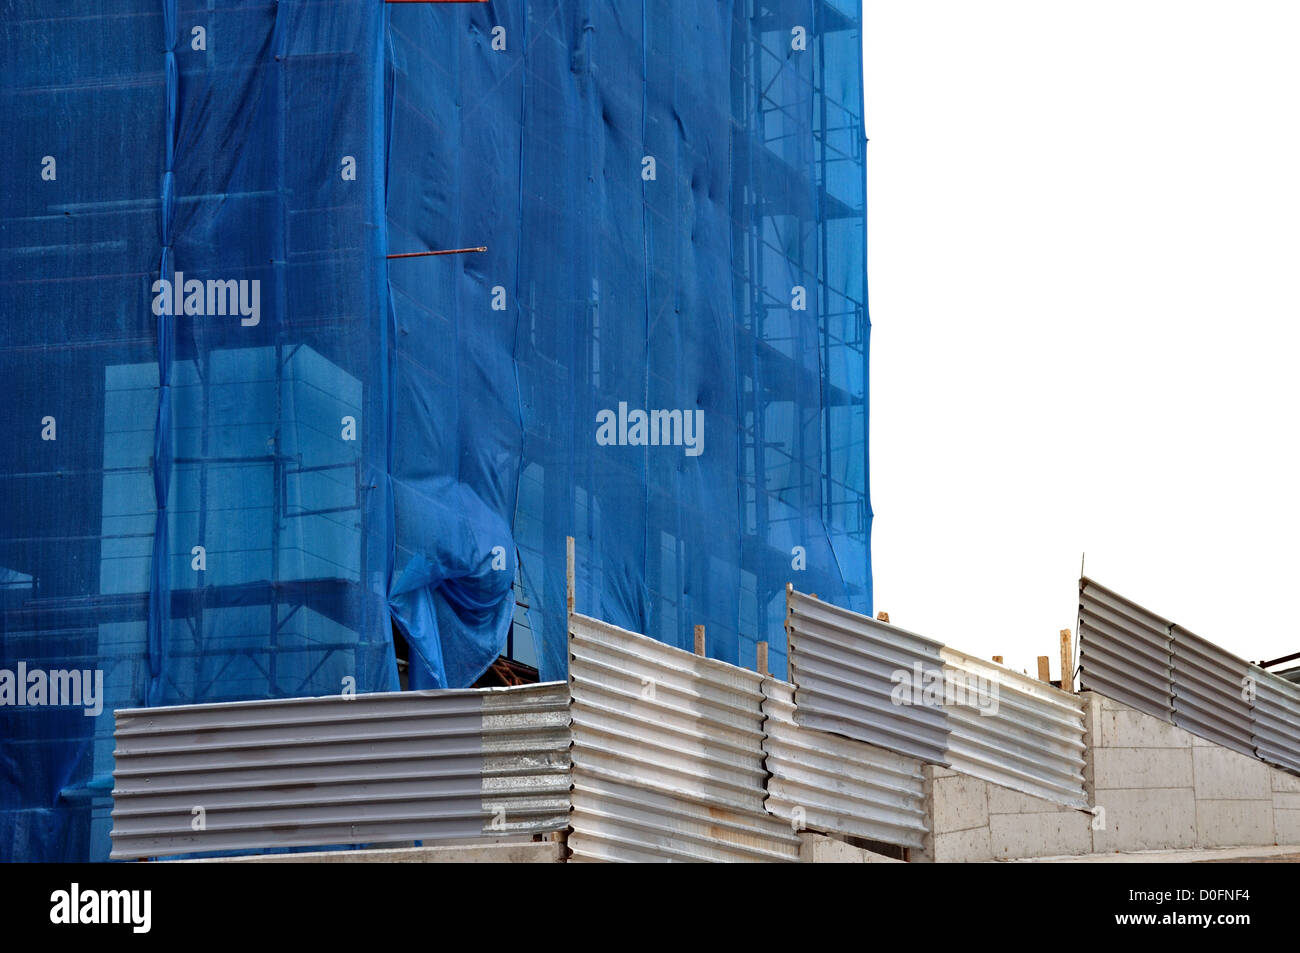 Building covered with construction debris netting. Aluminum fence and scaffold. Stock Photo